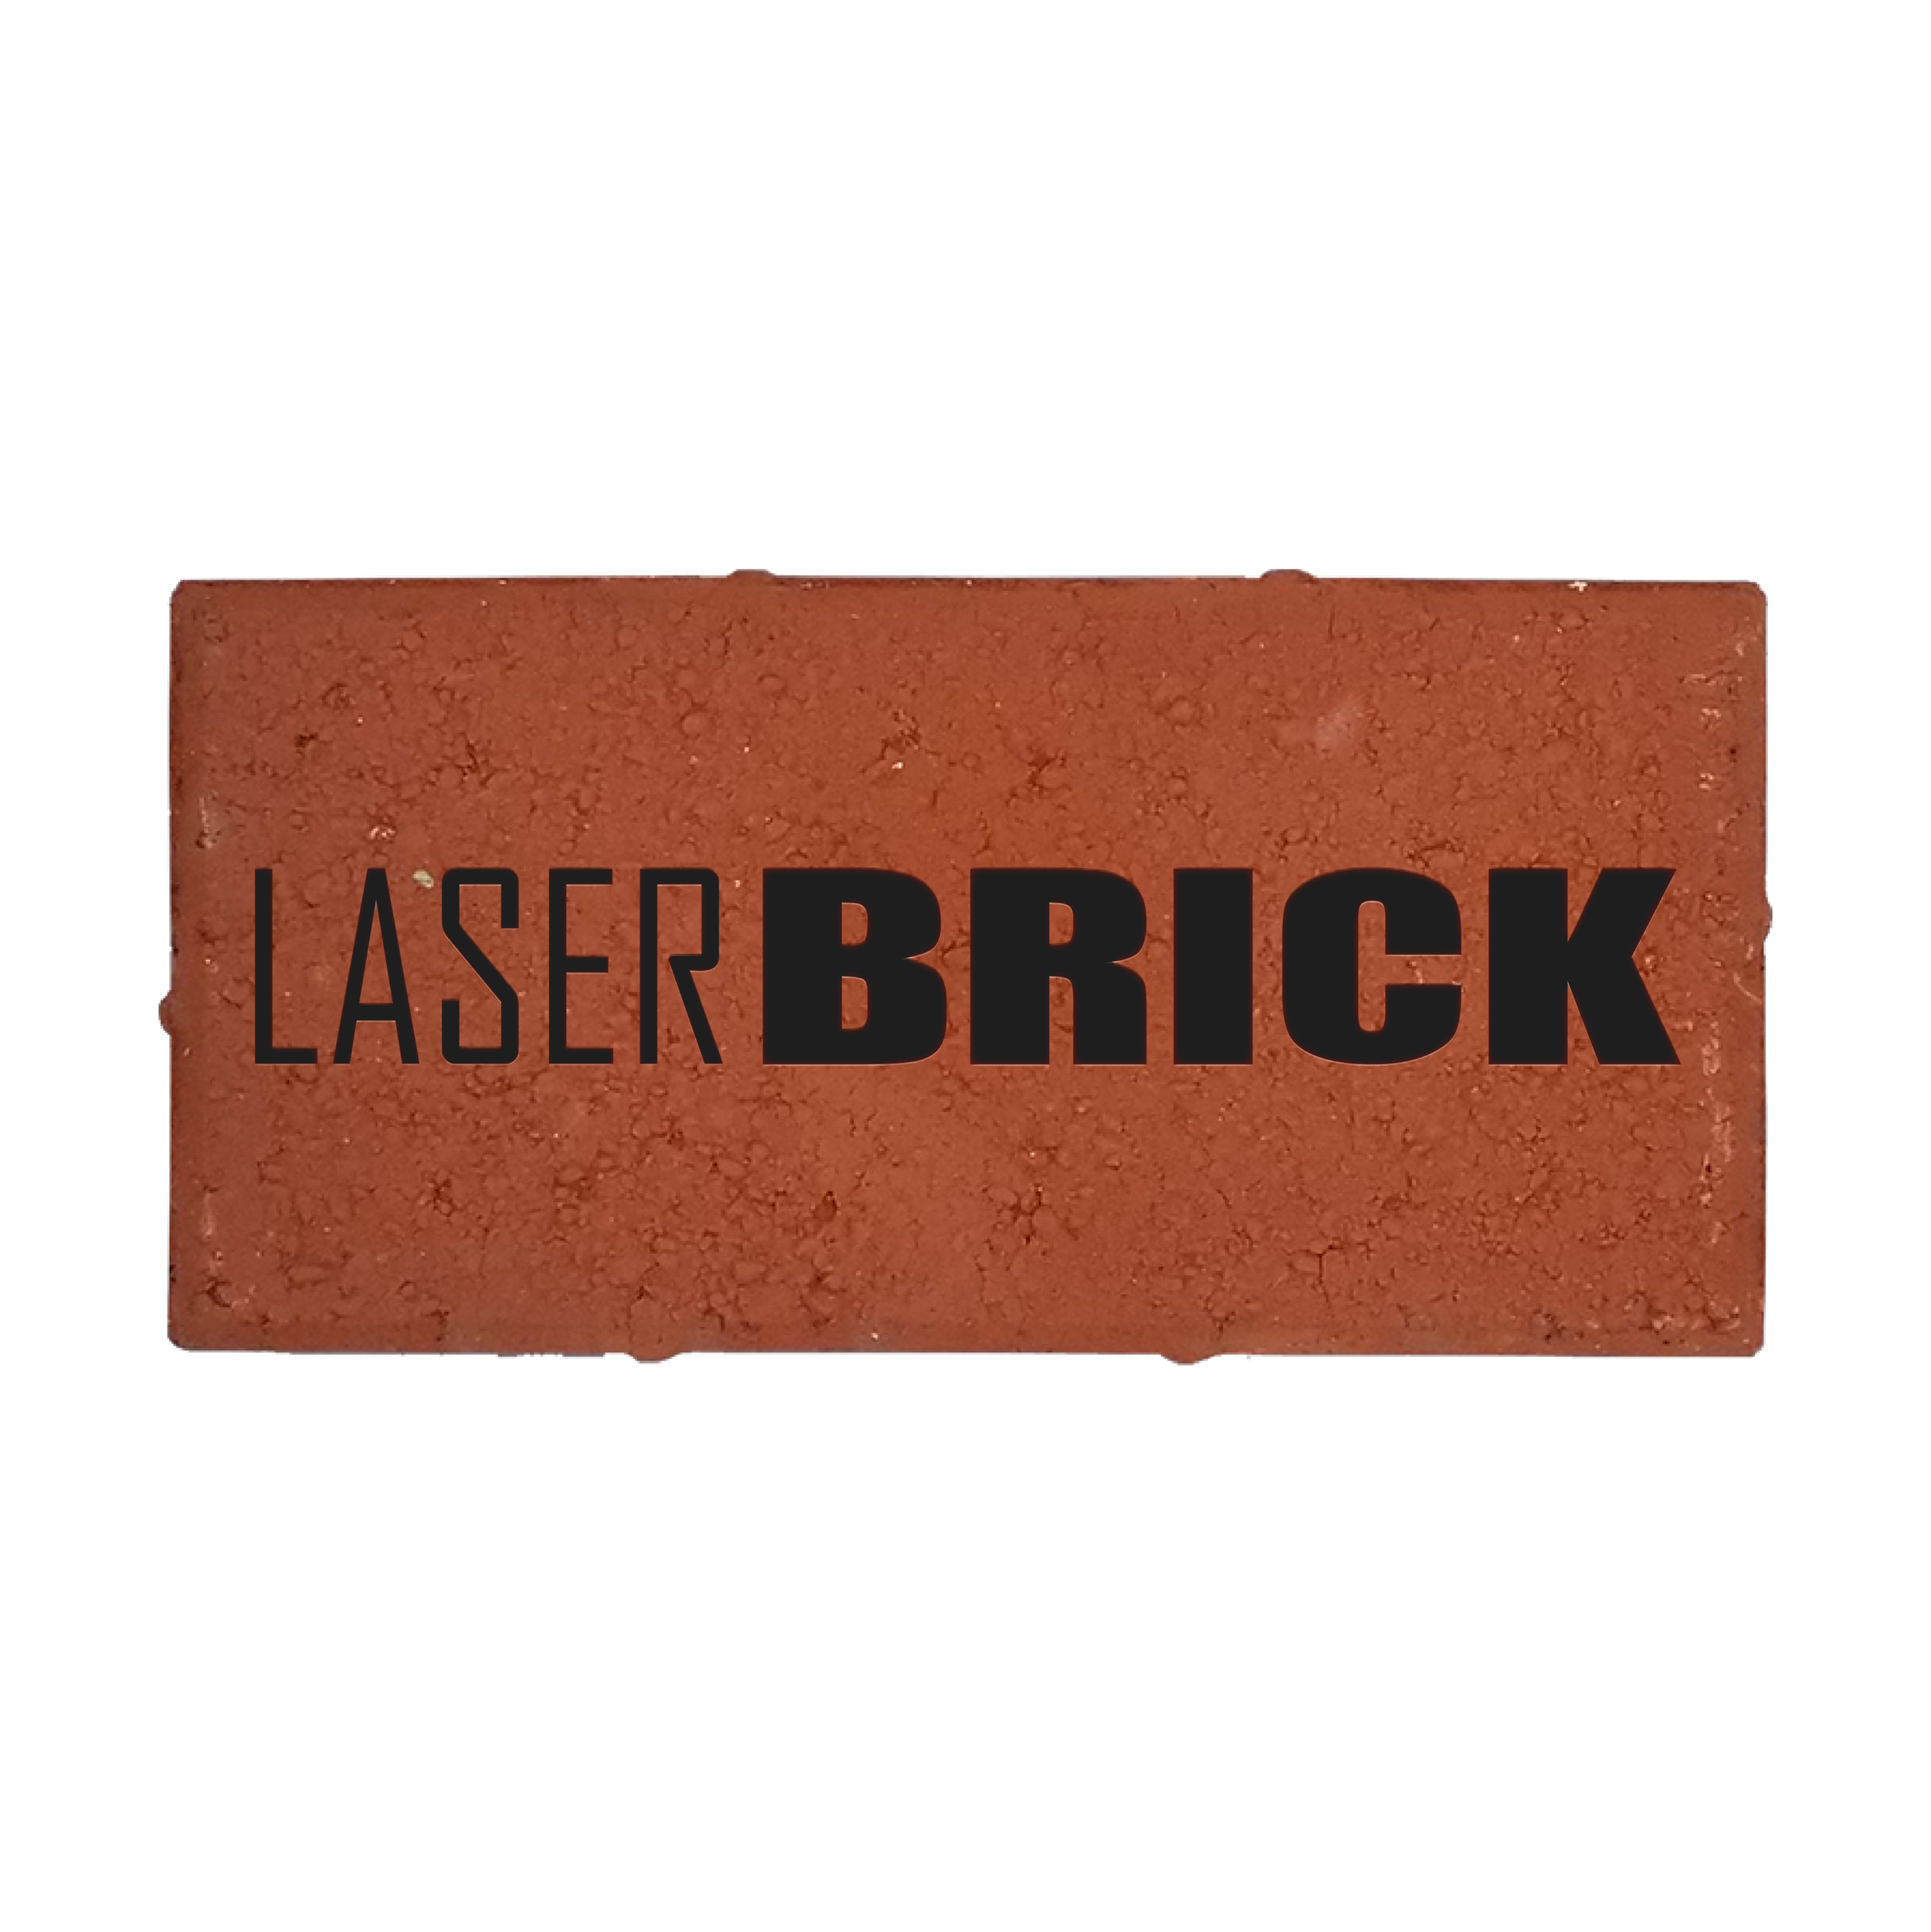 LaserGrade Commemorative Brick Paver with Lugs, 4.00" x 8.00" x 2.25", Laser Engraved - Craftworks NW, LLC